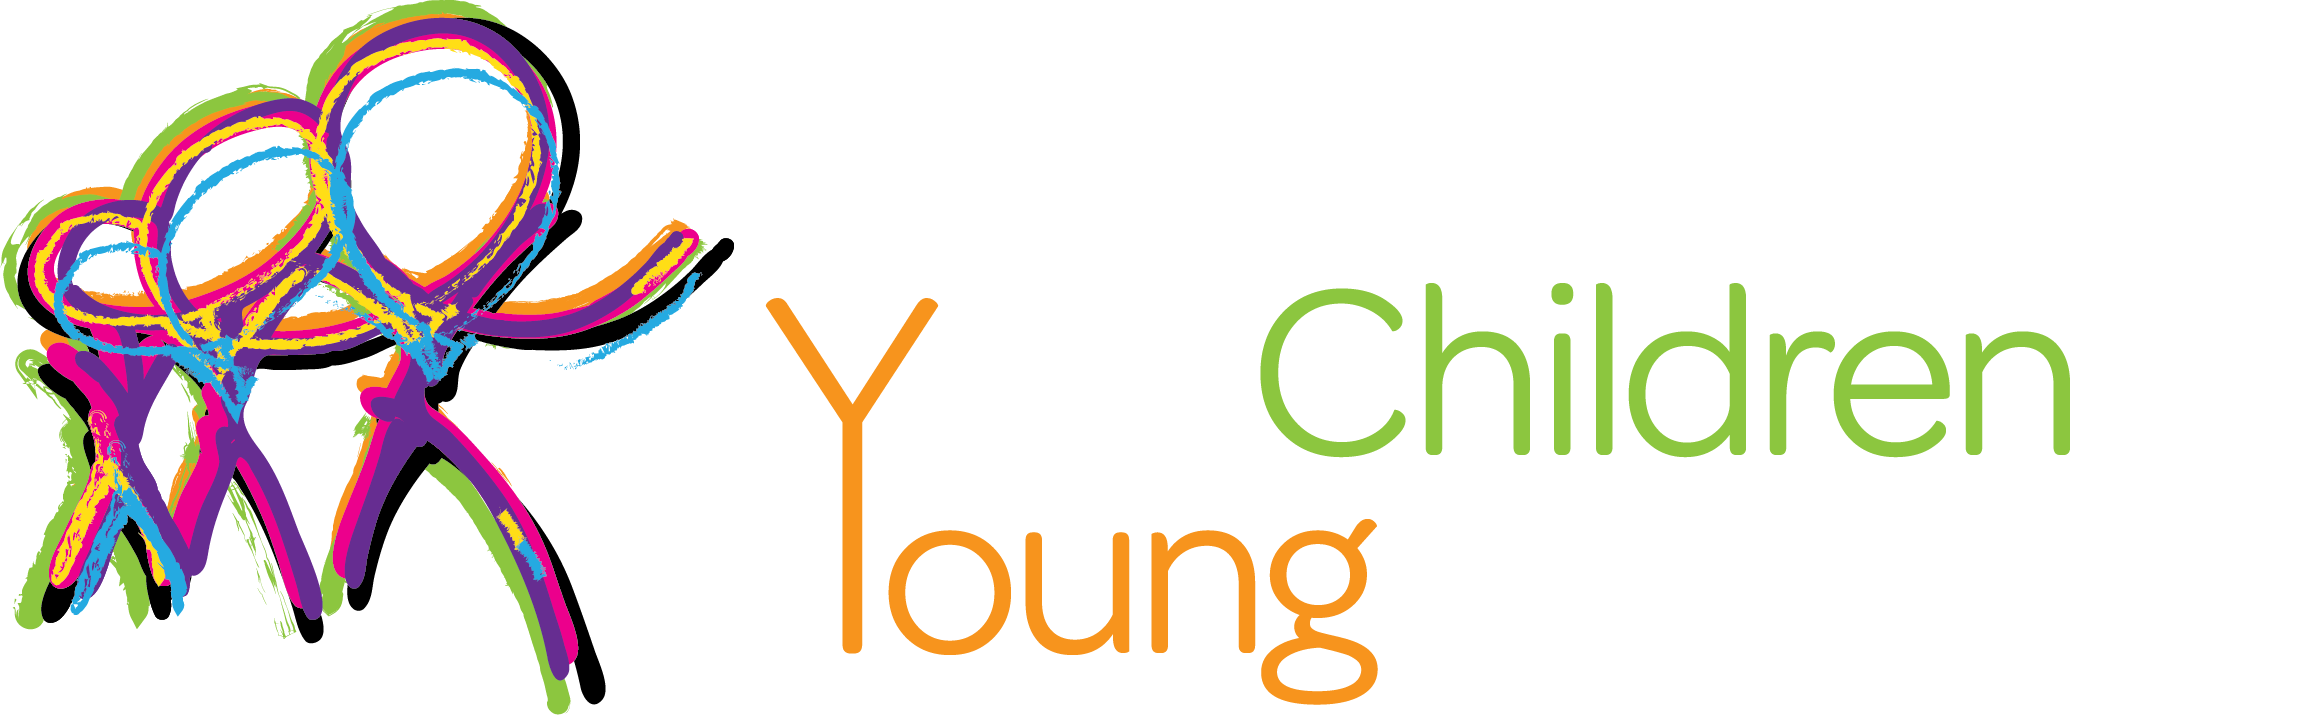 Commissioner for Children and Young People